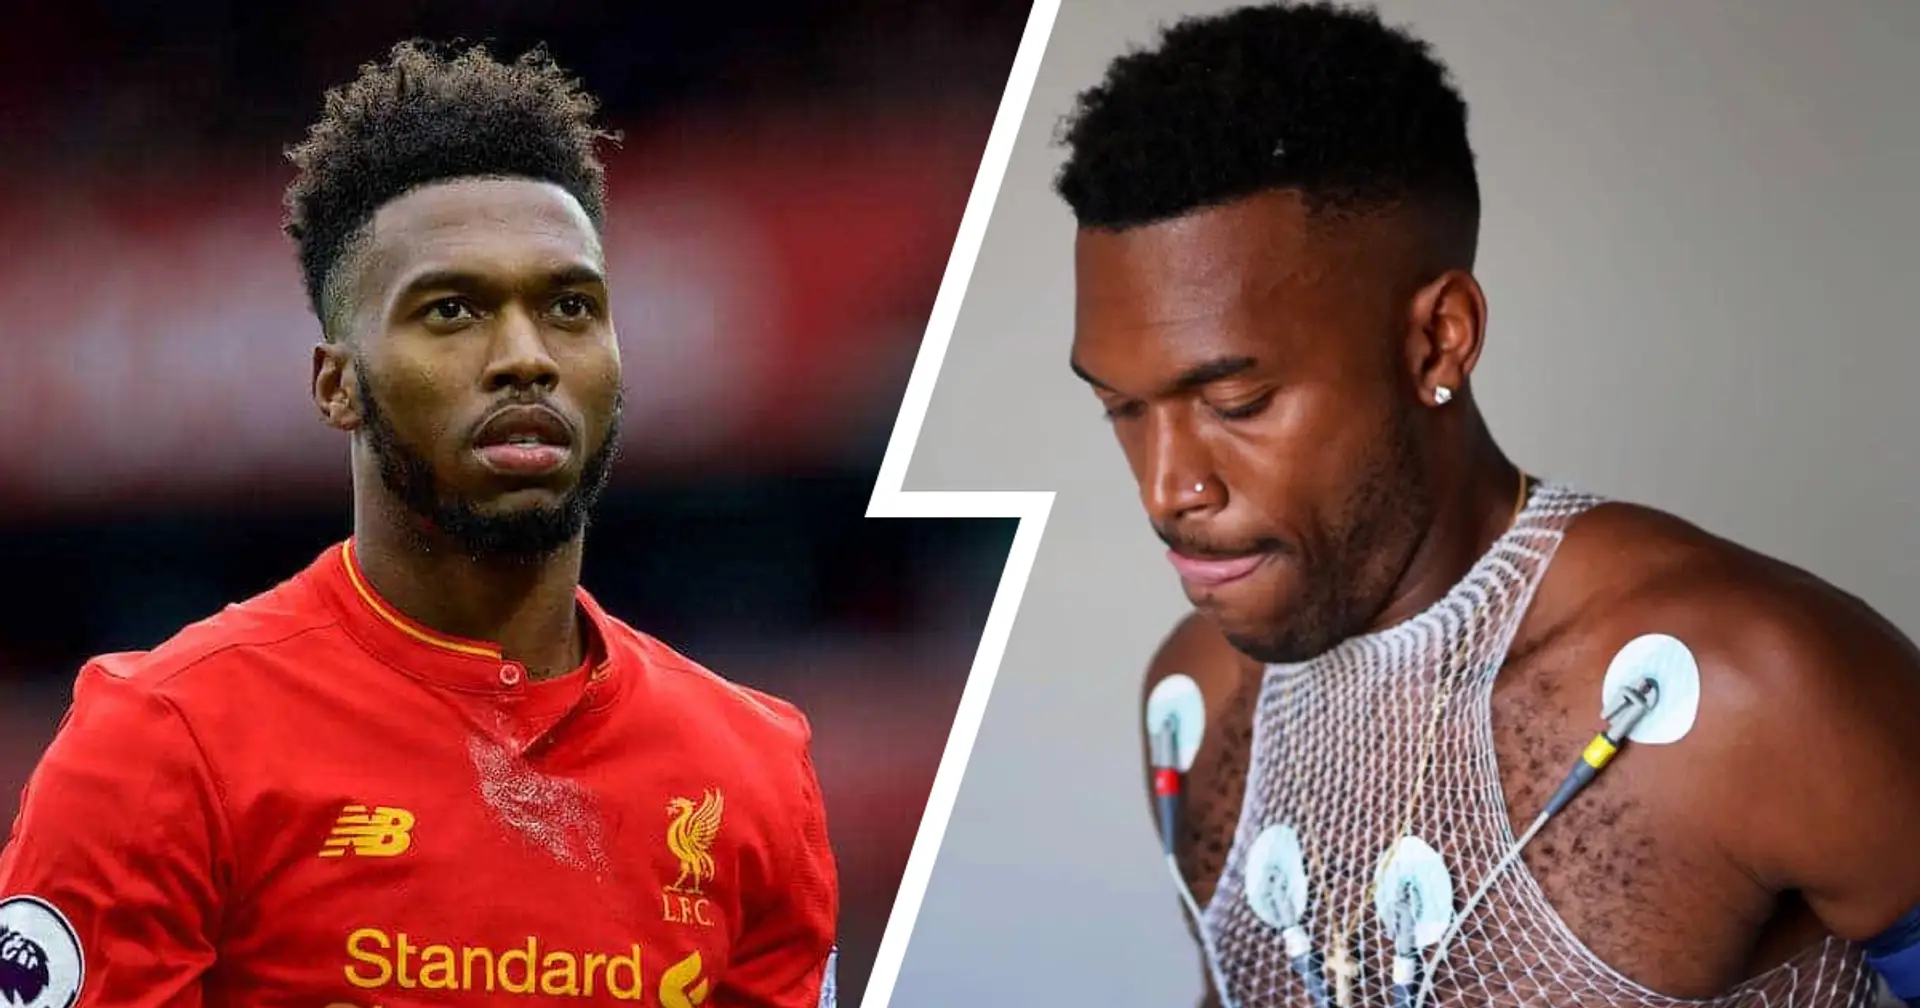 Ex-Liverpool fan favourite Sturridge training with Mallorca in Spain as he looks to return to football